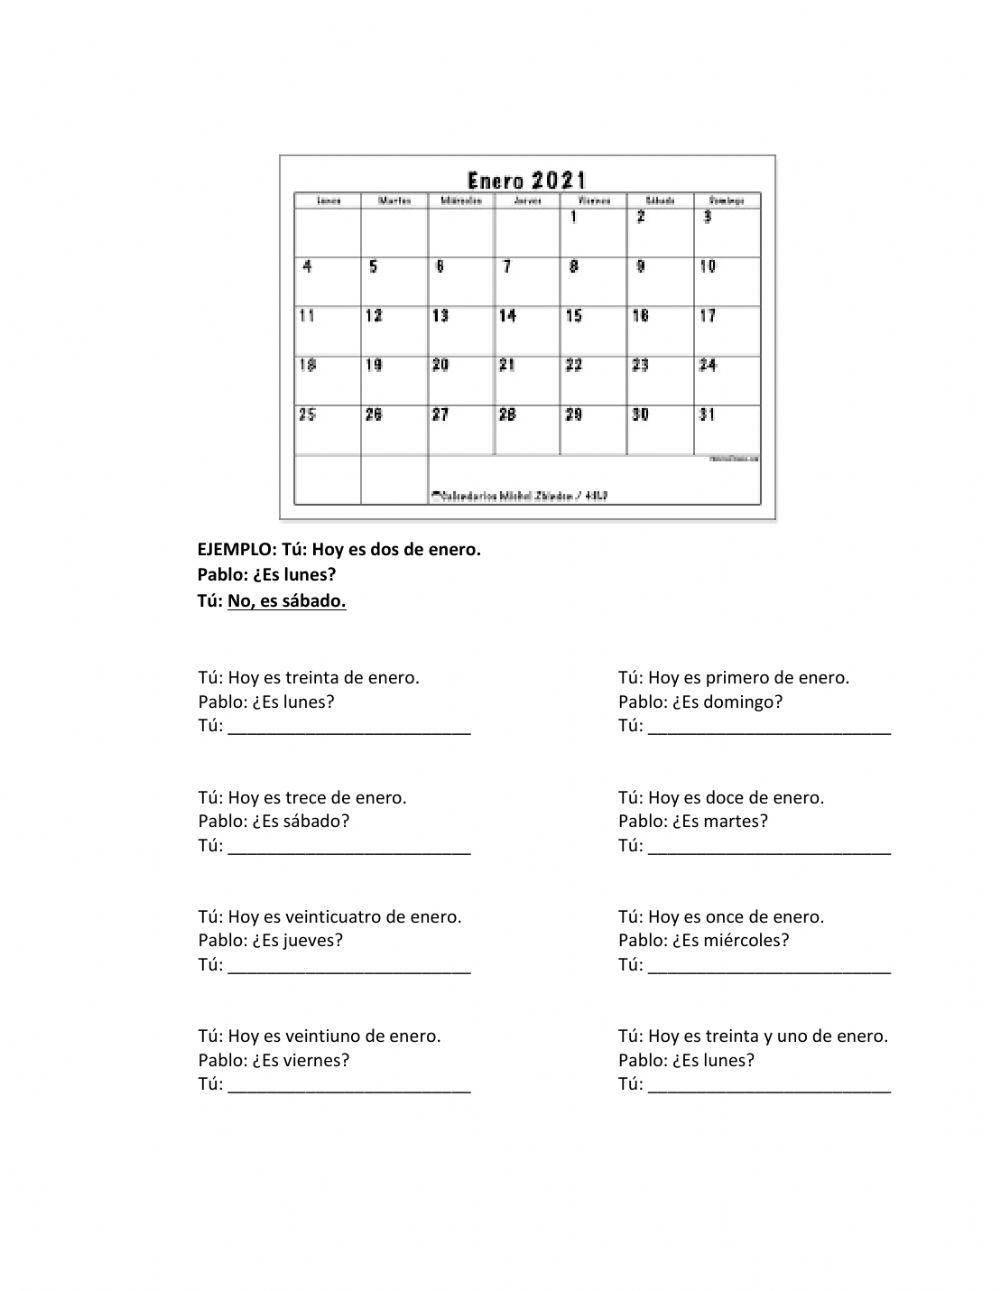 Classroom objects and calendar